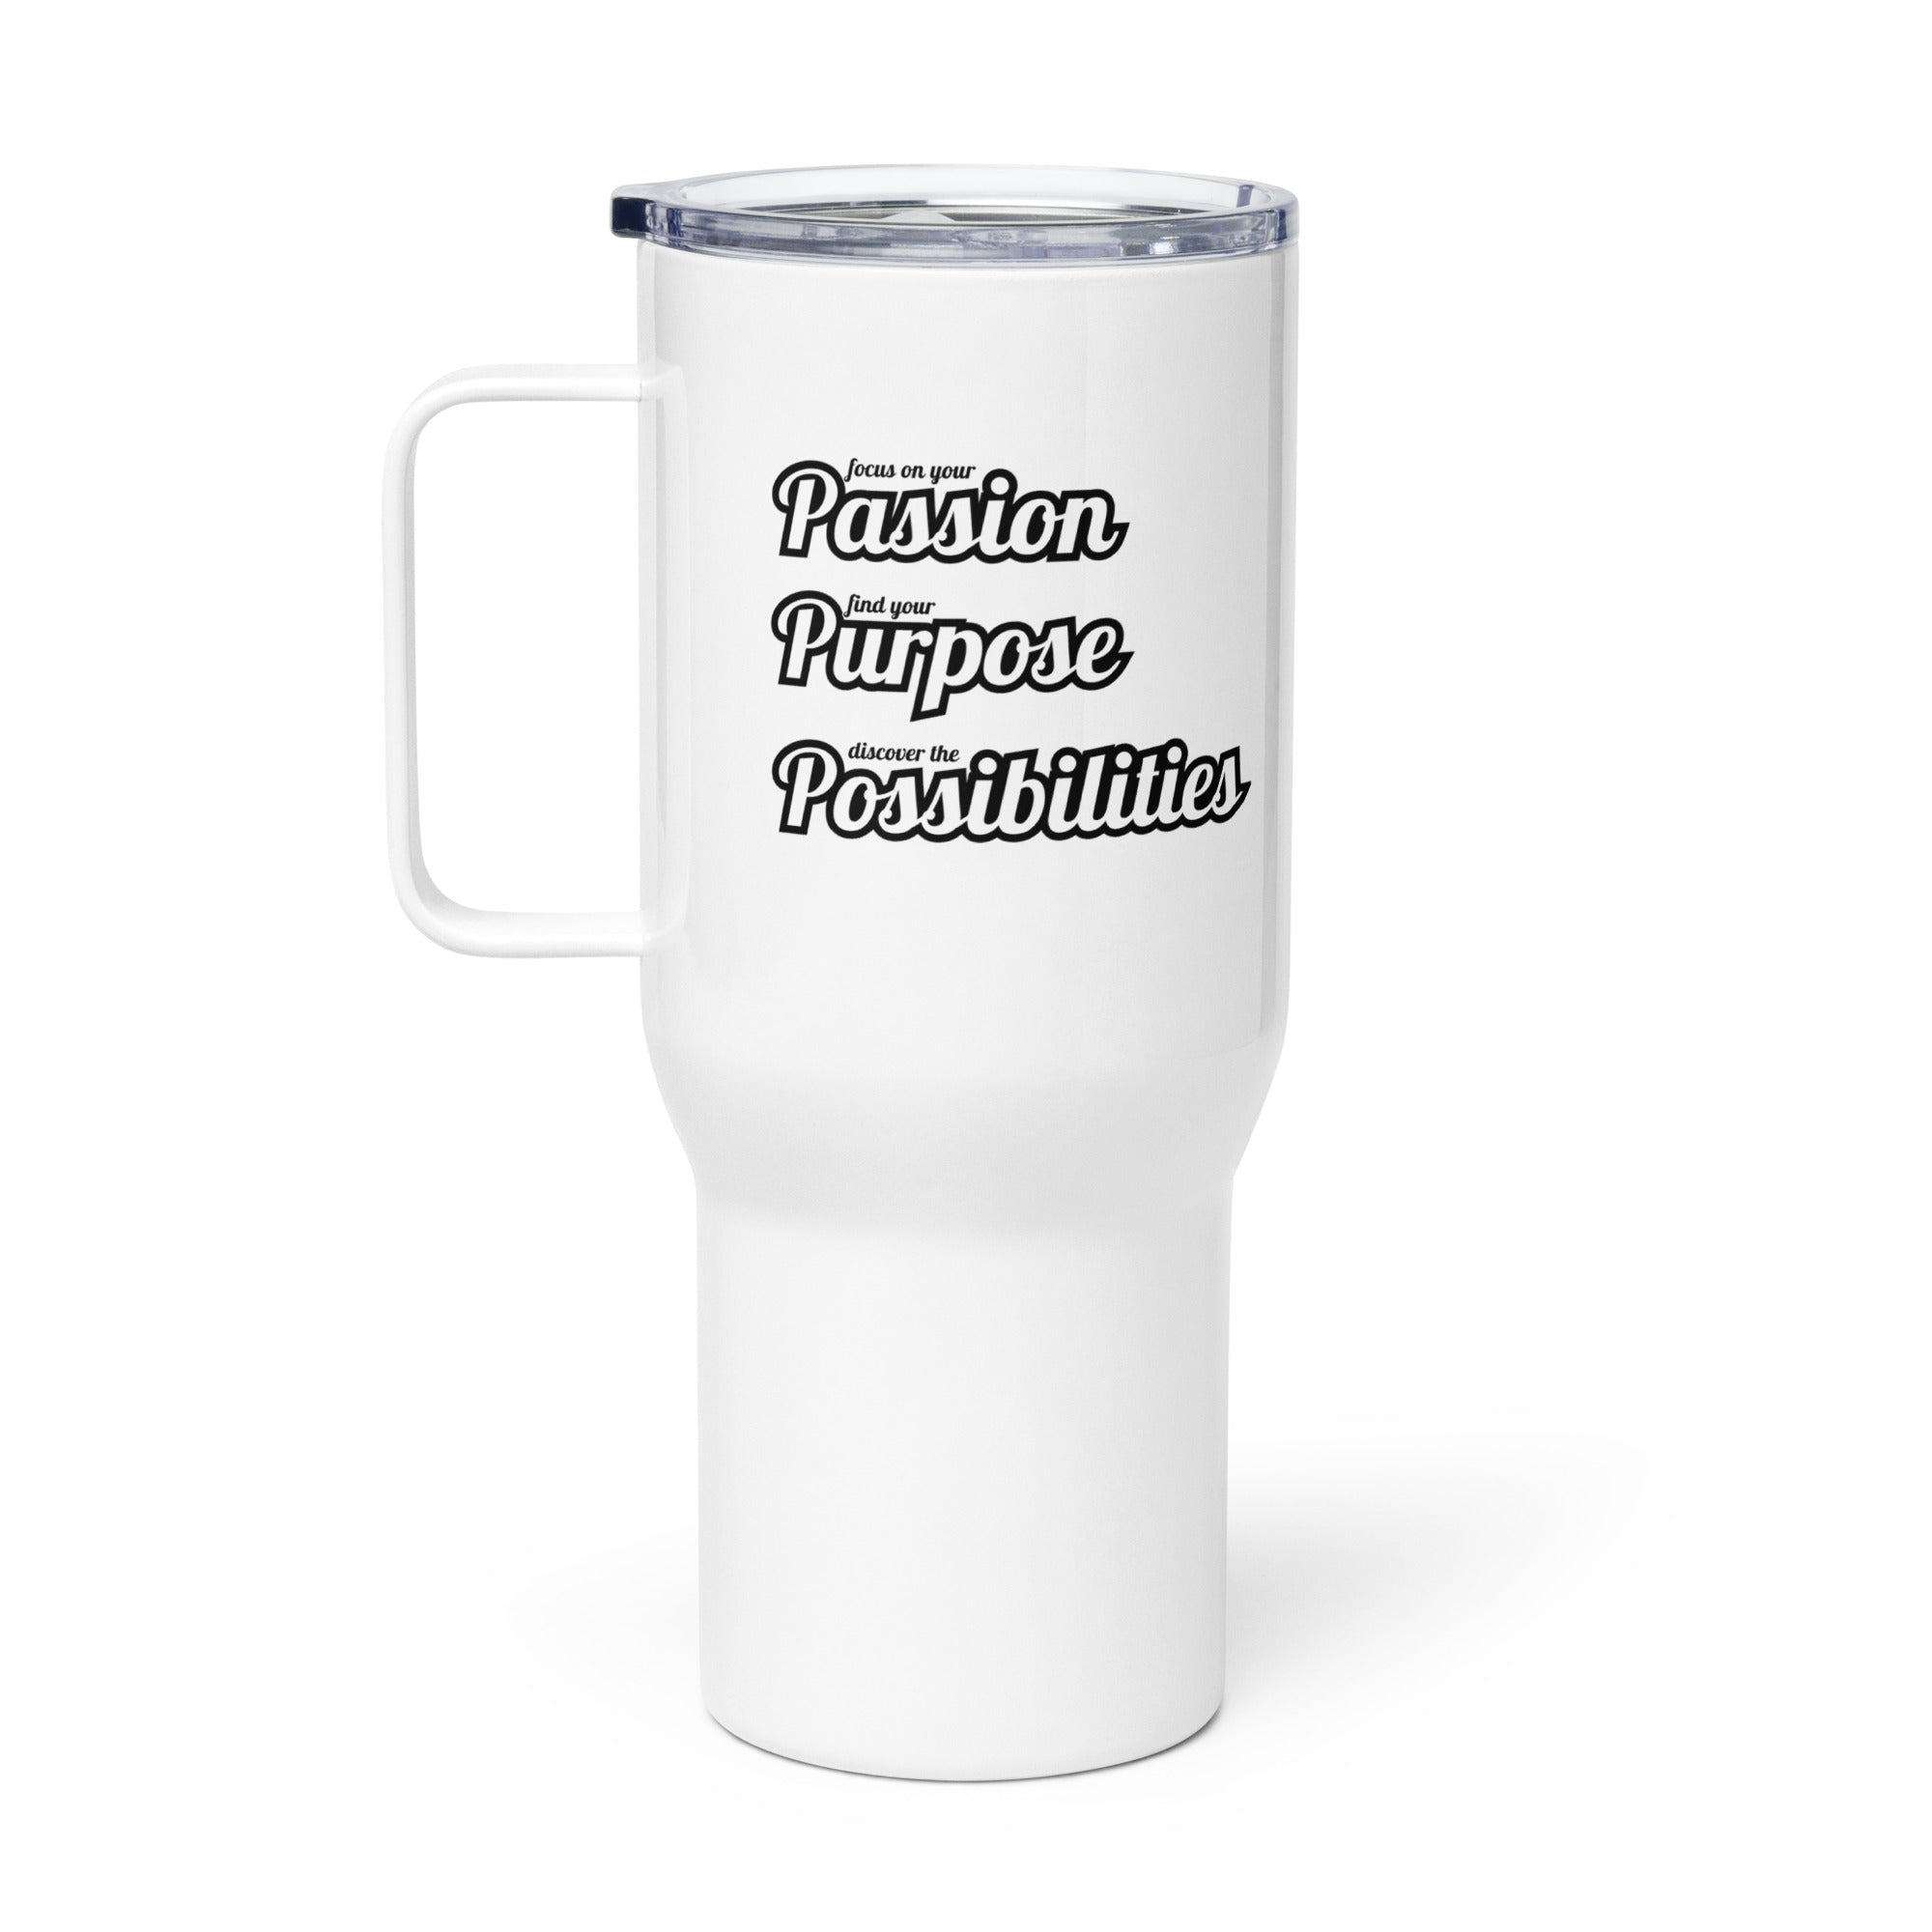 Focus on Your Passion, Find Your Purpose, Discover The Possibilities Travel Mug - The Kindness Cause